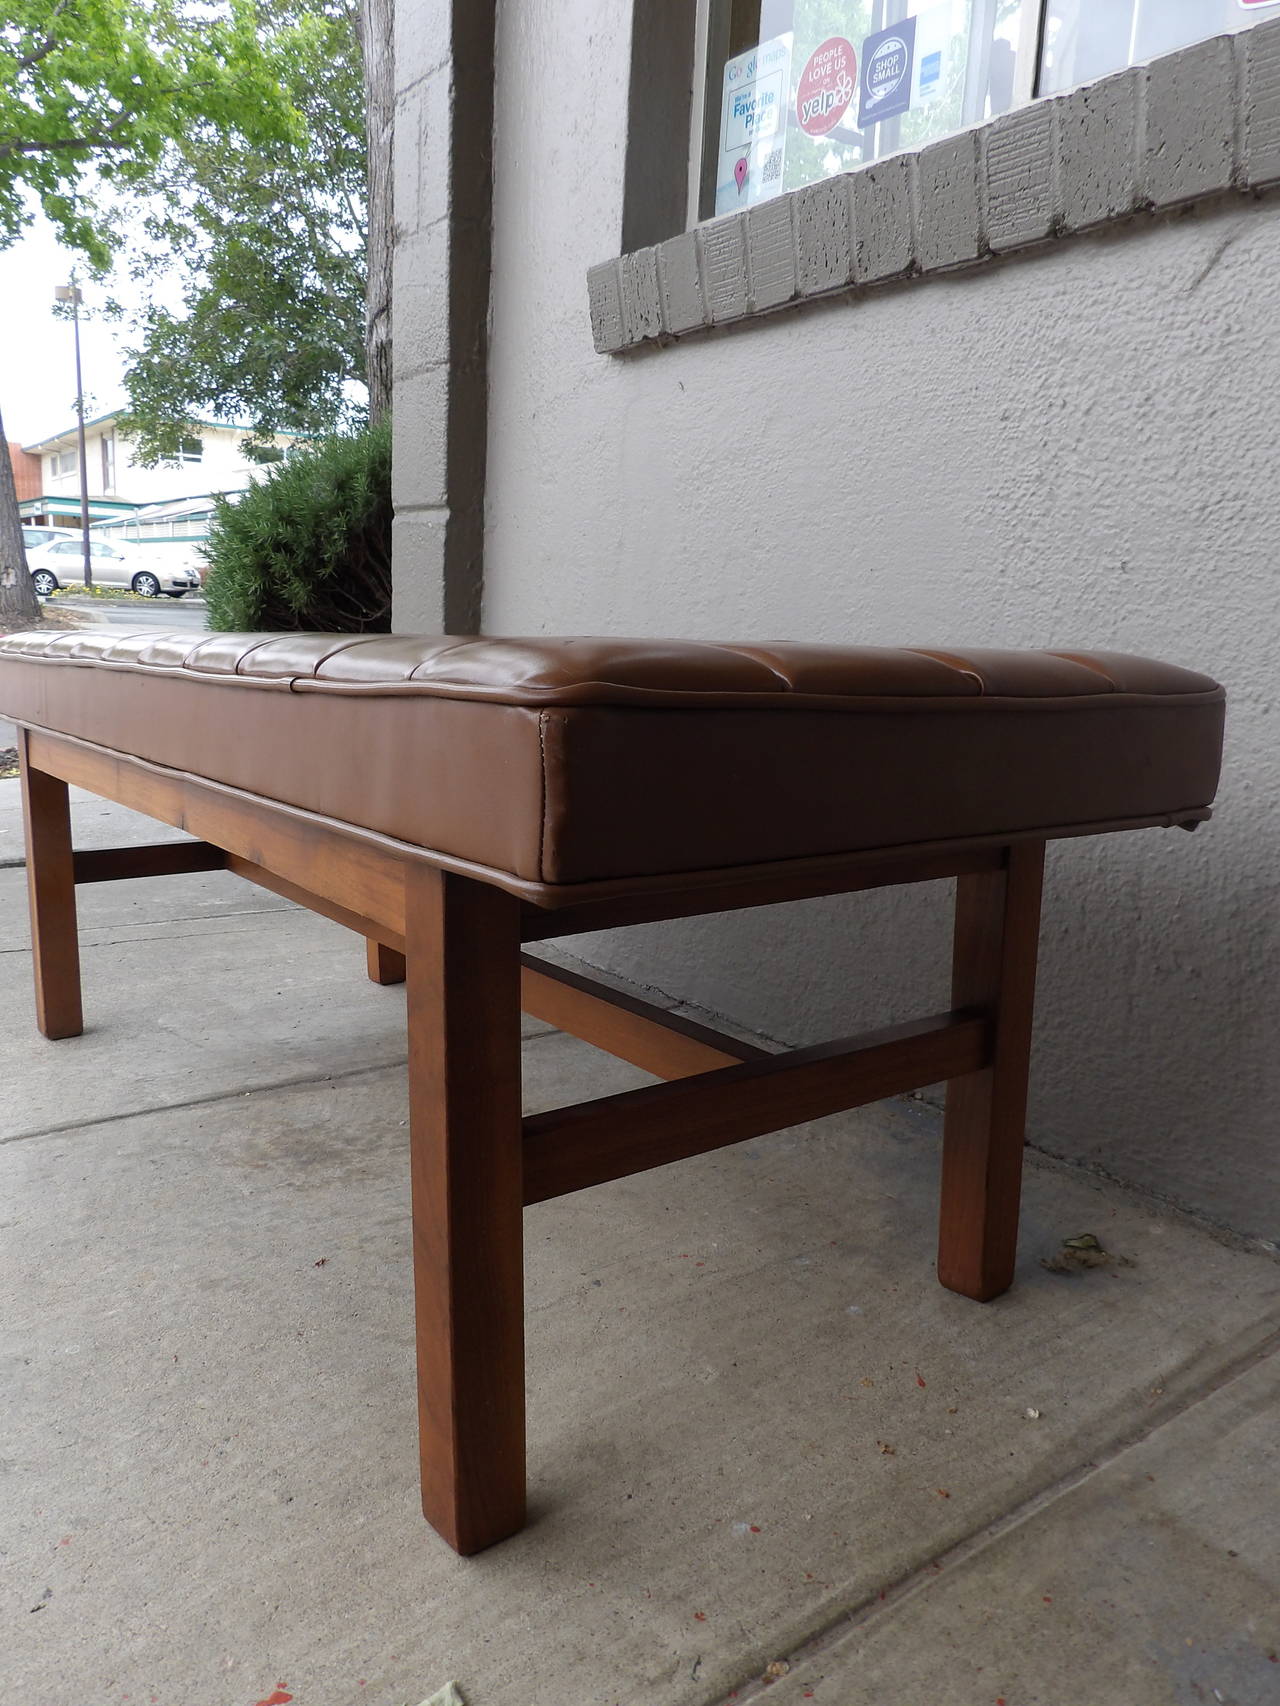 Classic Mid-Century Modern Button Tufted Bench In Good Condition For Sale In Fulton, CA